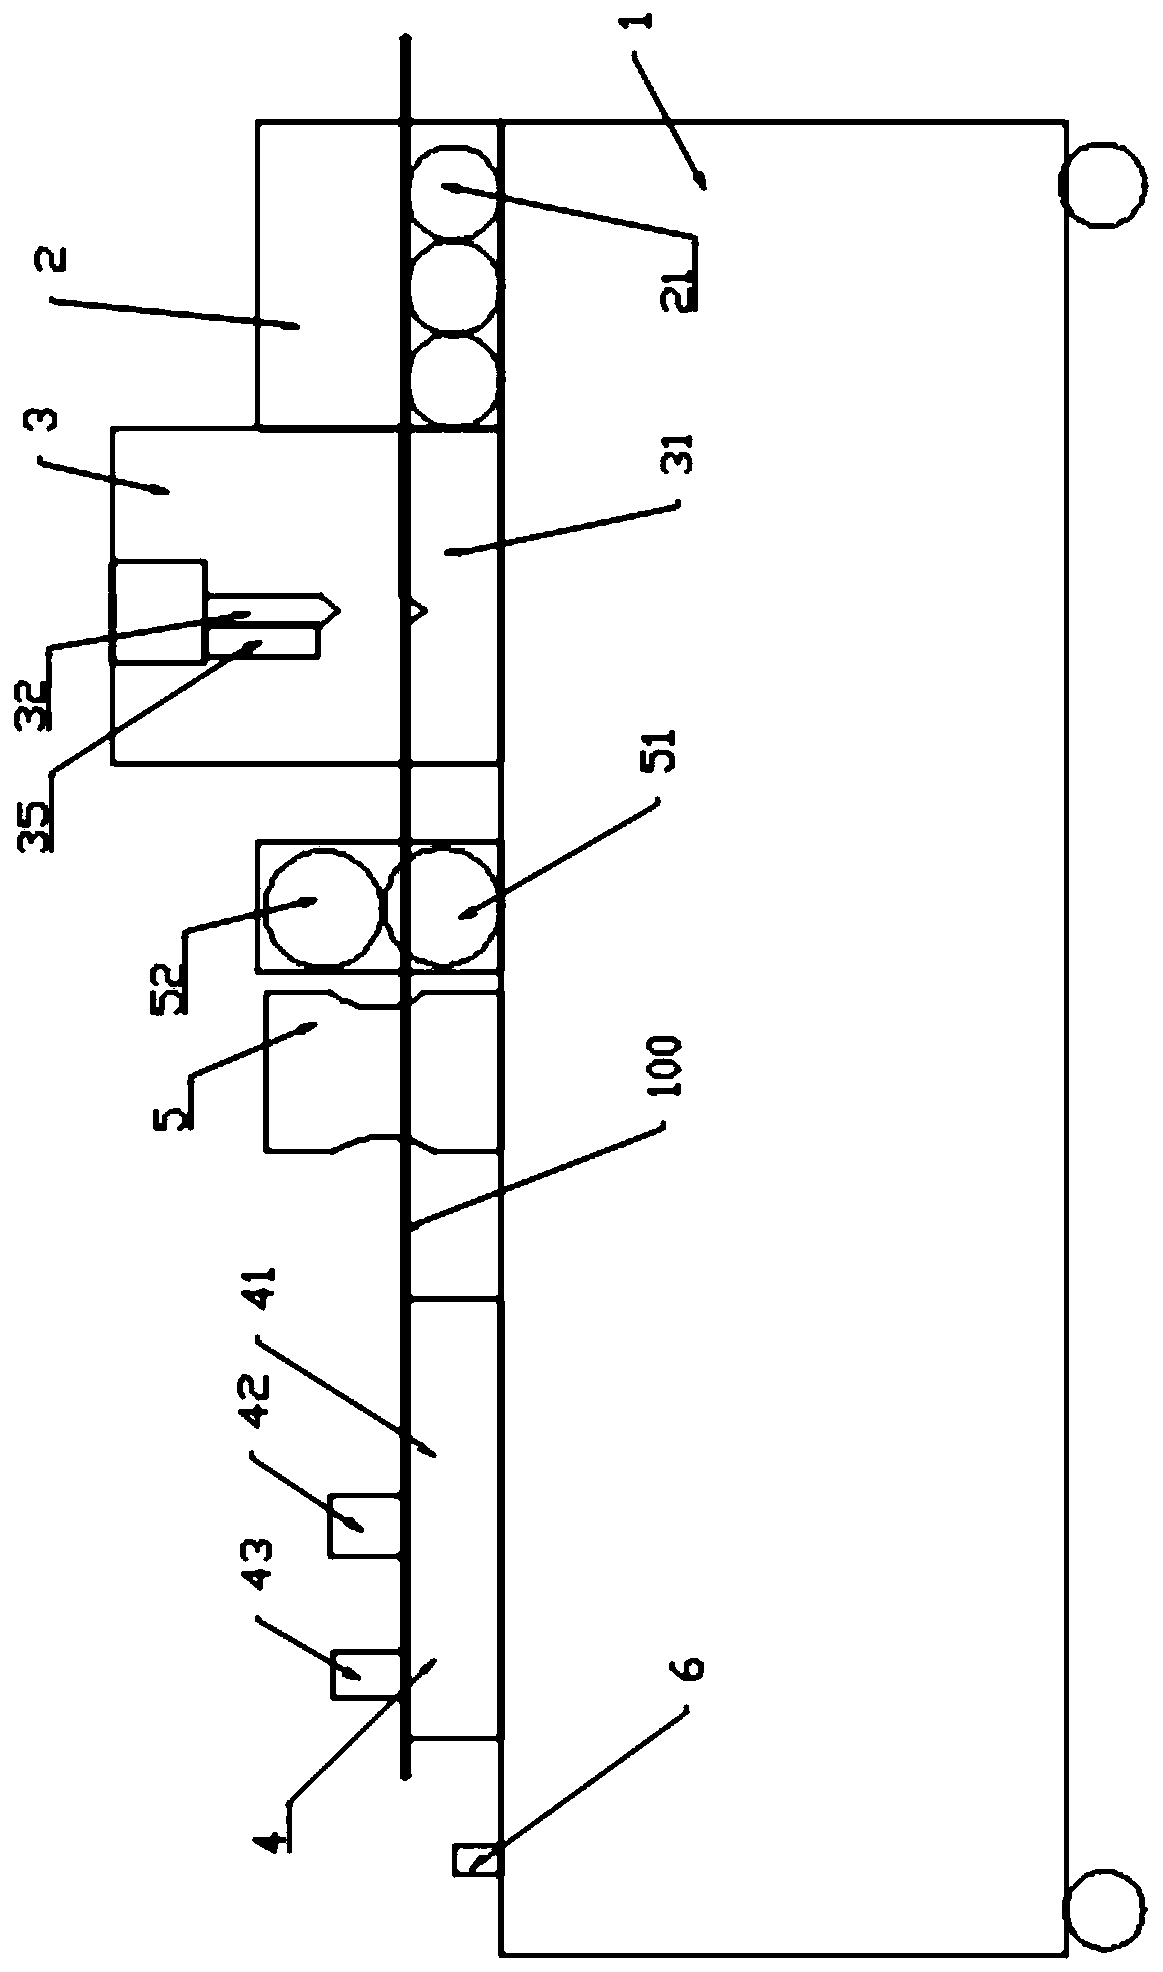 Cutting device capable of bending reinforcing steel bars for house building construction